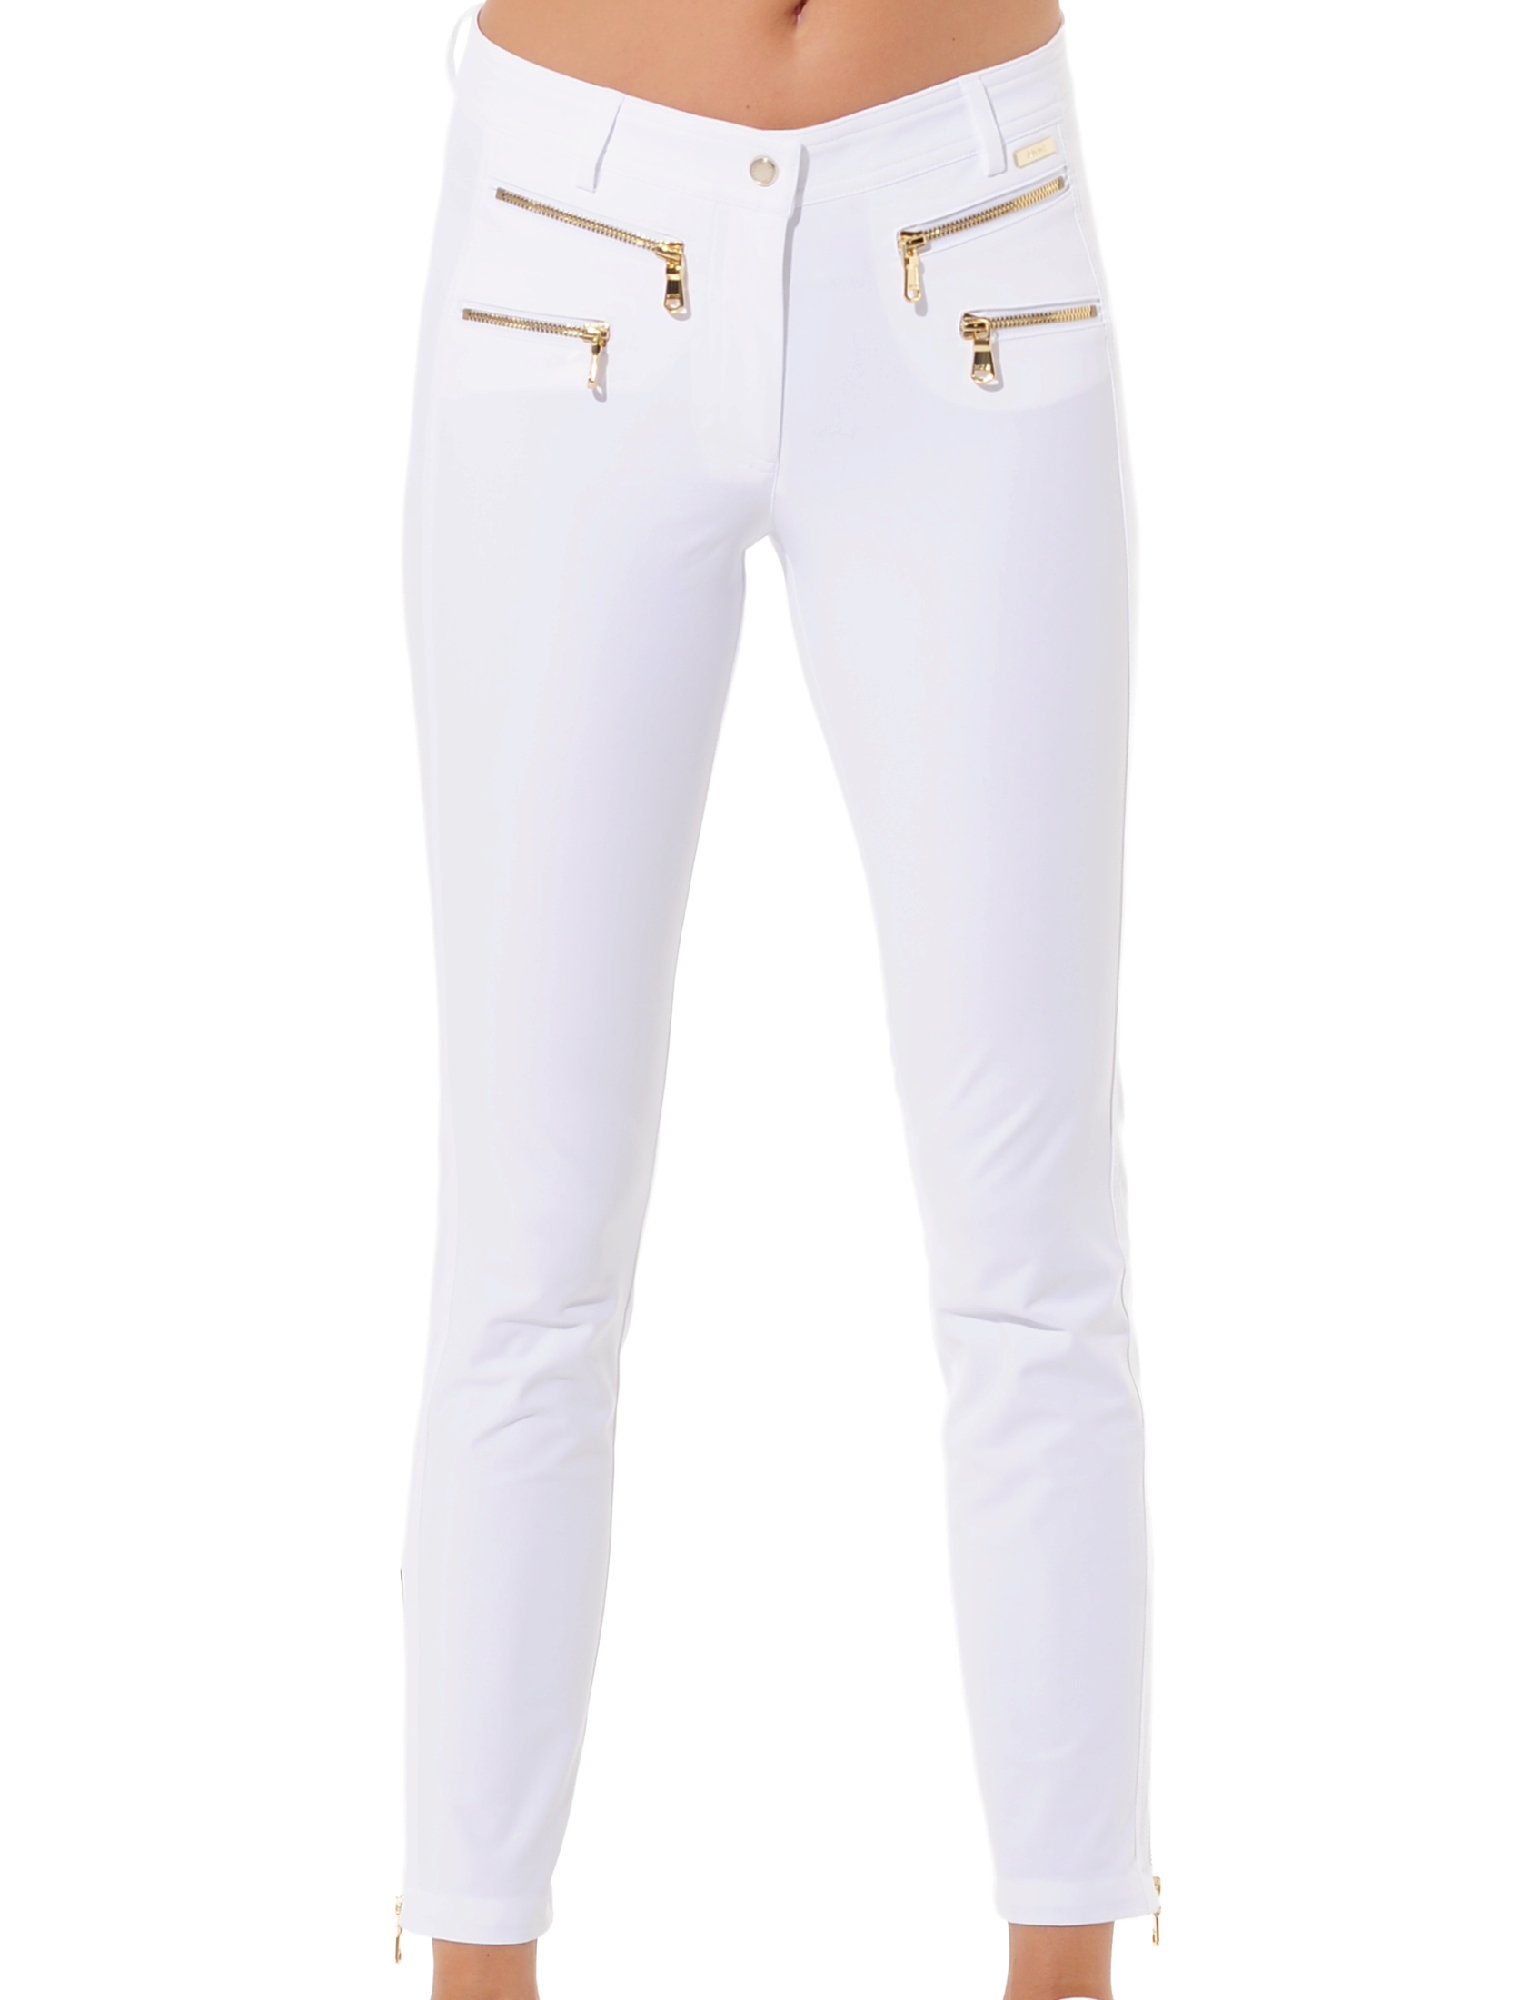 4way stretch shiny gold double zip ankle pants white 